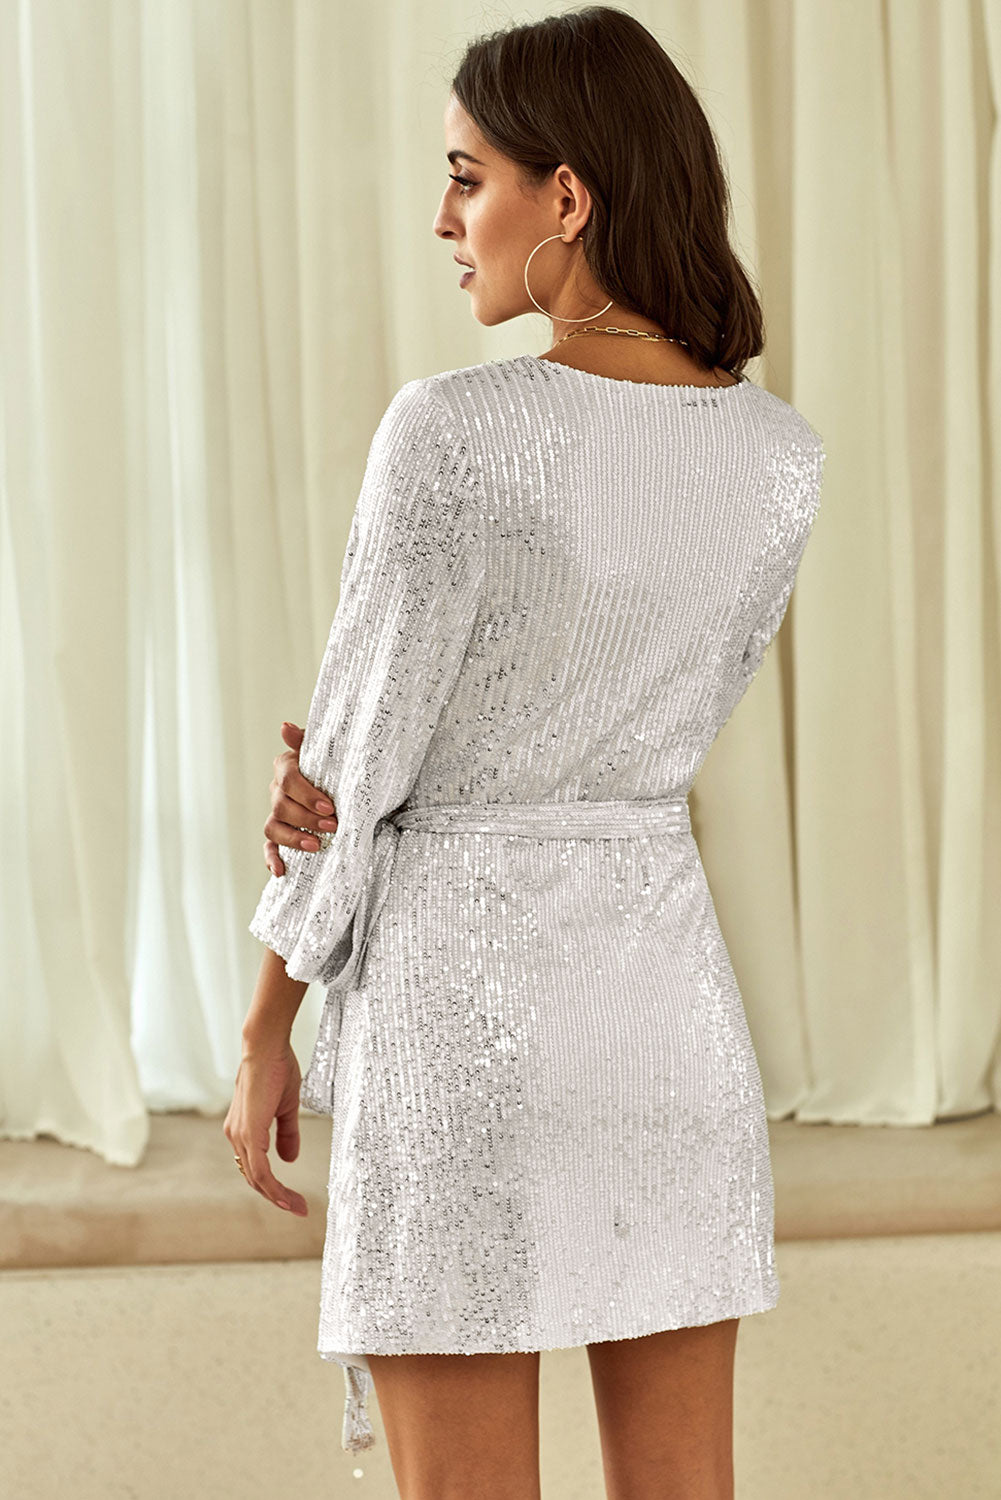 Silver Sequin Wrap Dress with Sash - EBEPEX